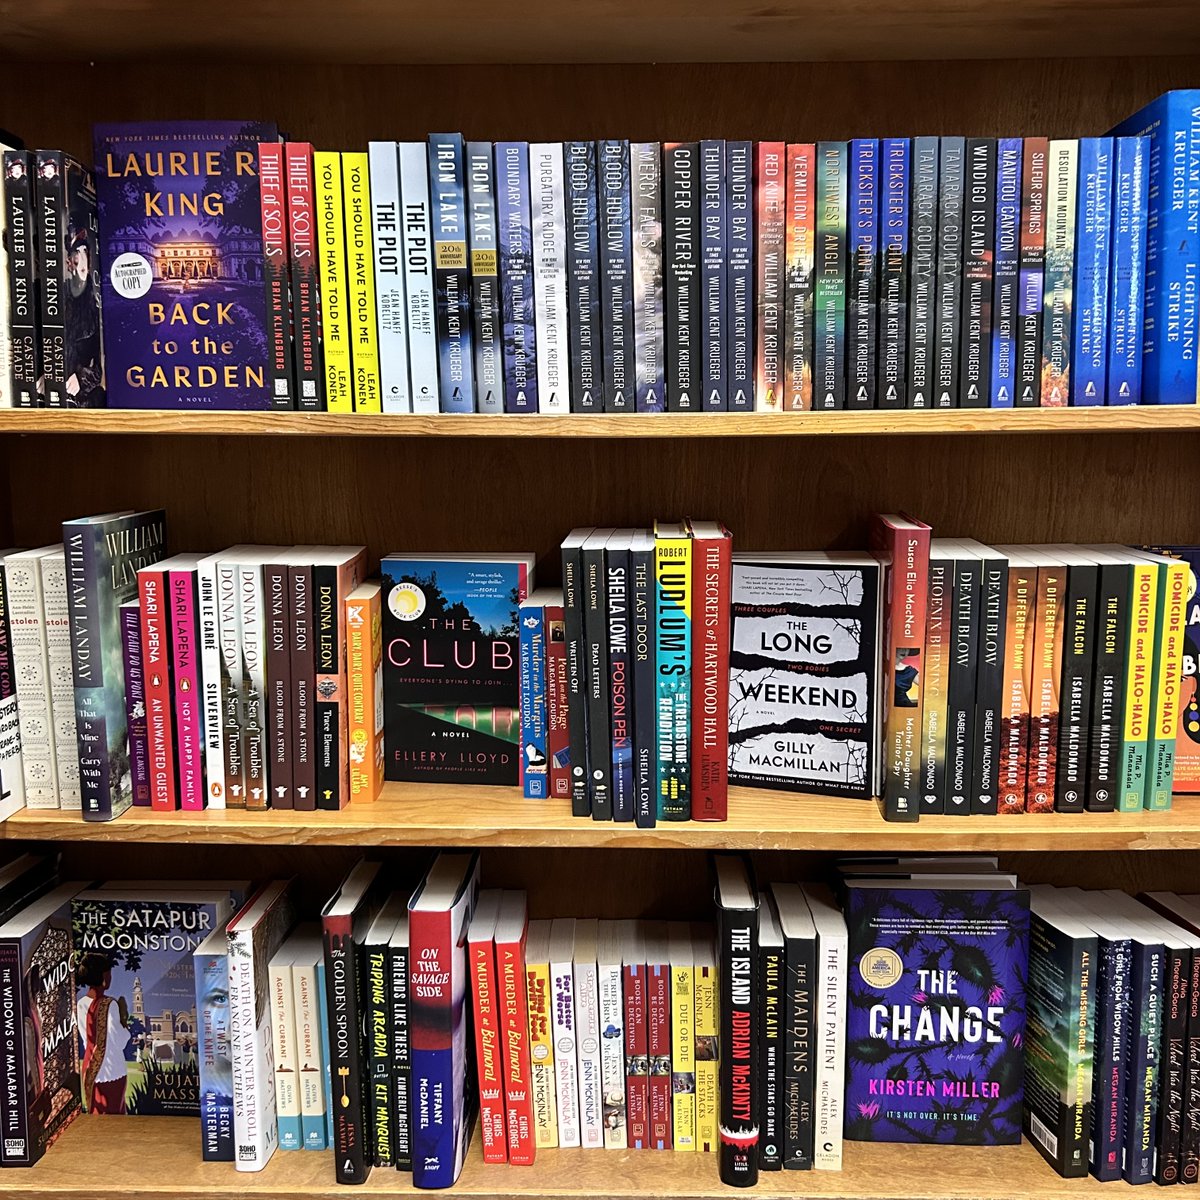 It's #MondayMystery! Do you prefer mystery series or standalones?
#indiebookstore #shoplocal #tucson #bookworm #booklover #shelfie #mysterynovel #bookseries